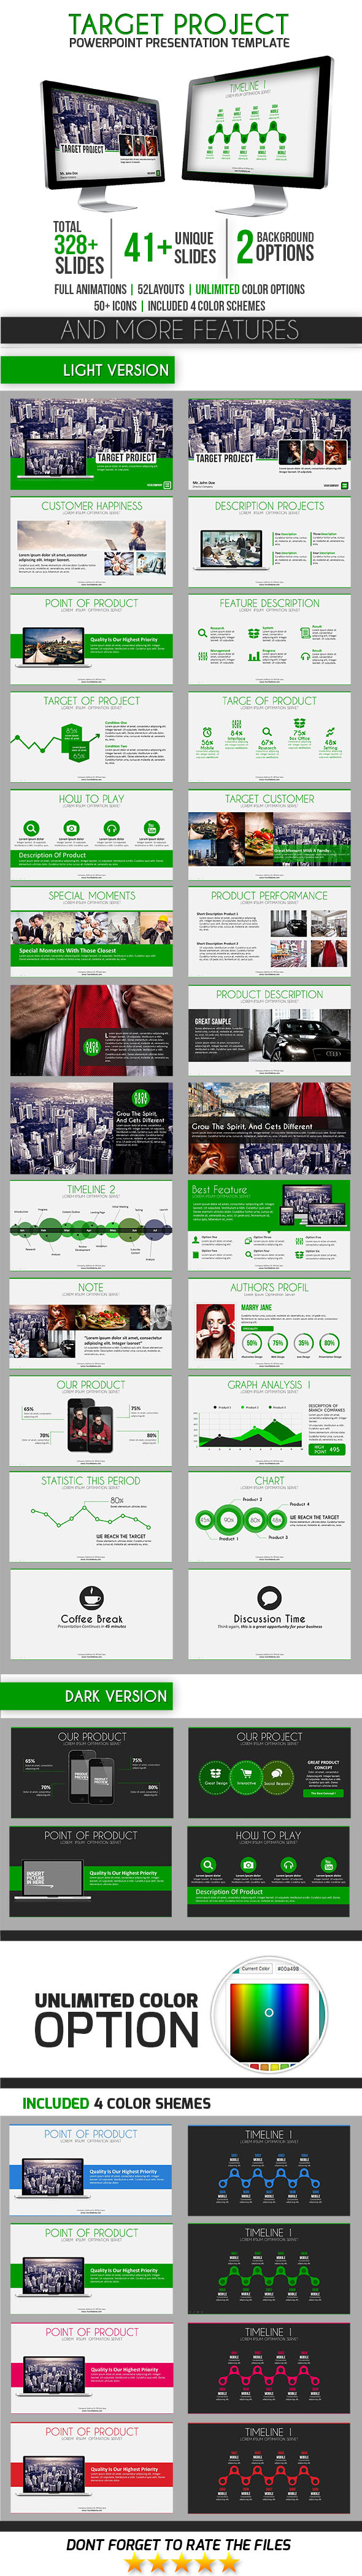 Target Project PowerPoint Template